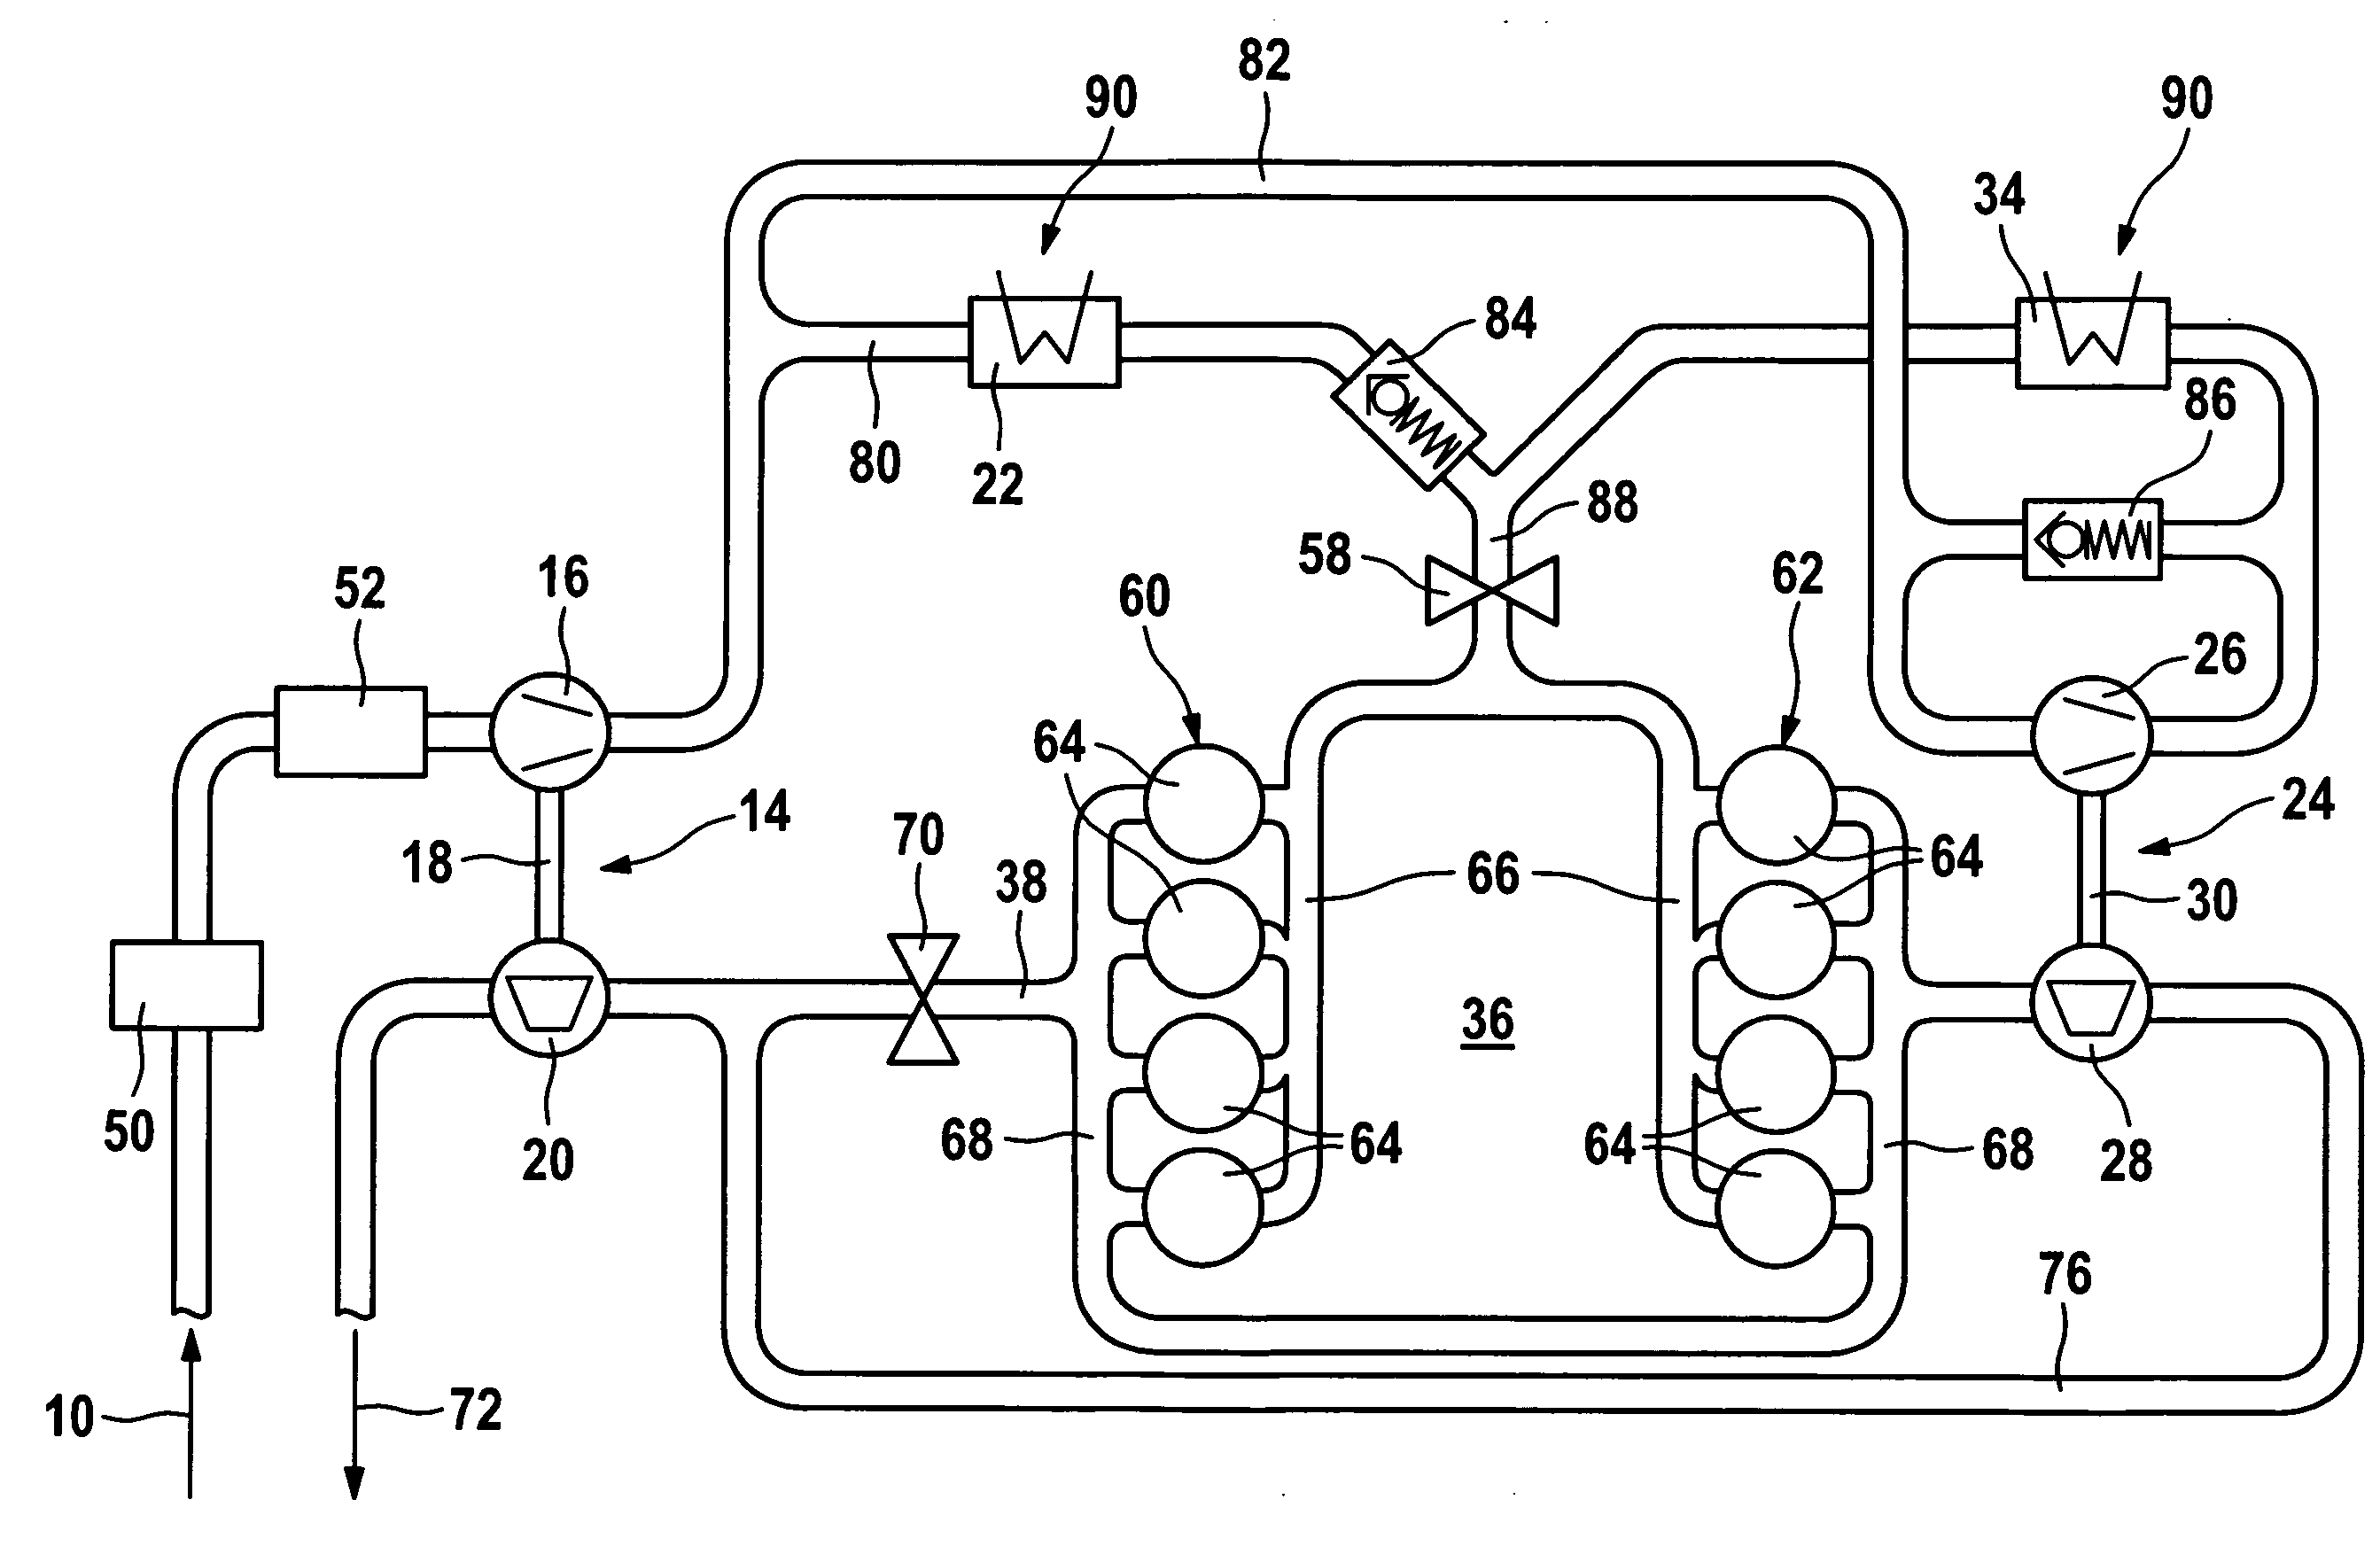 Supercharging system for two-stage supercharging of V-type internal combustion engines